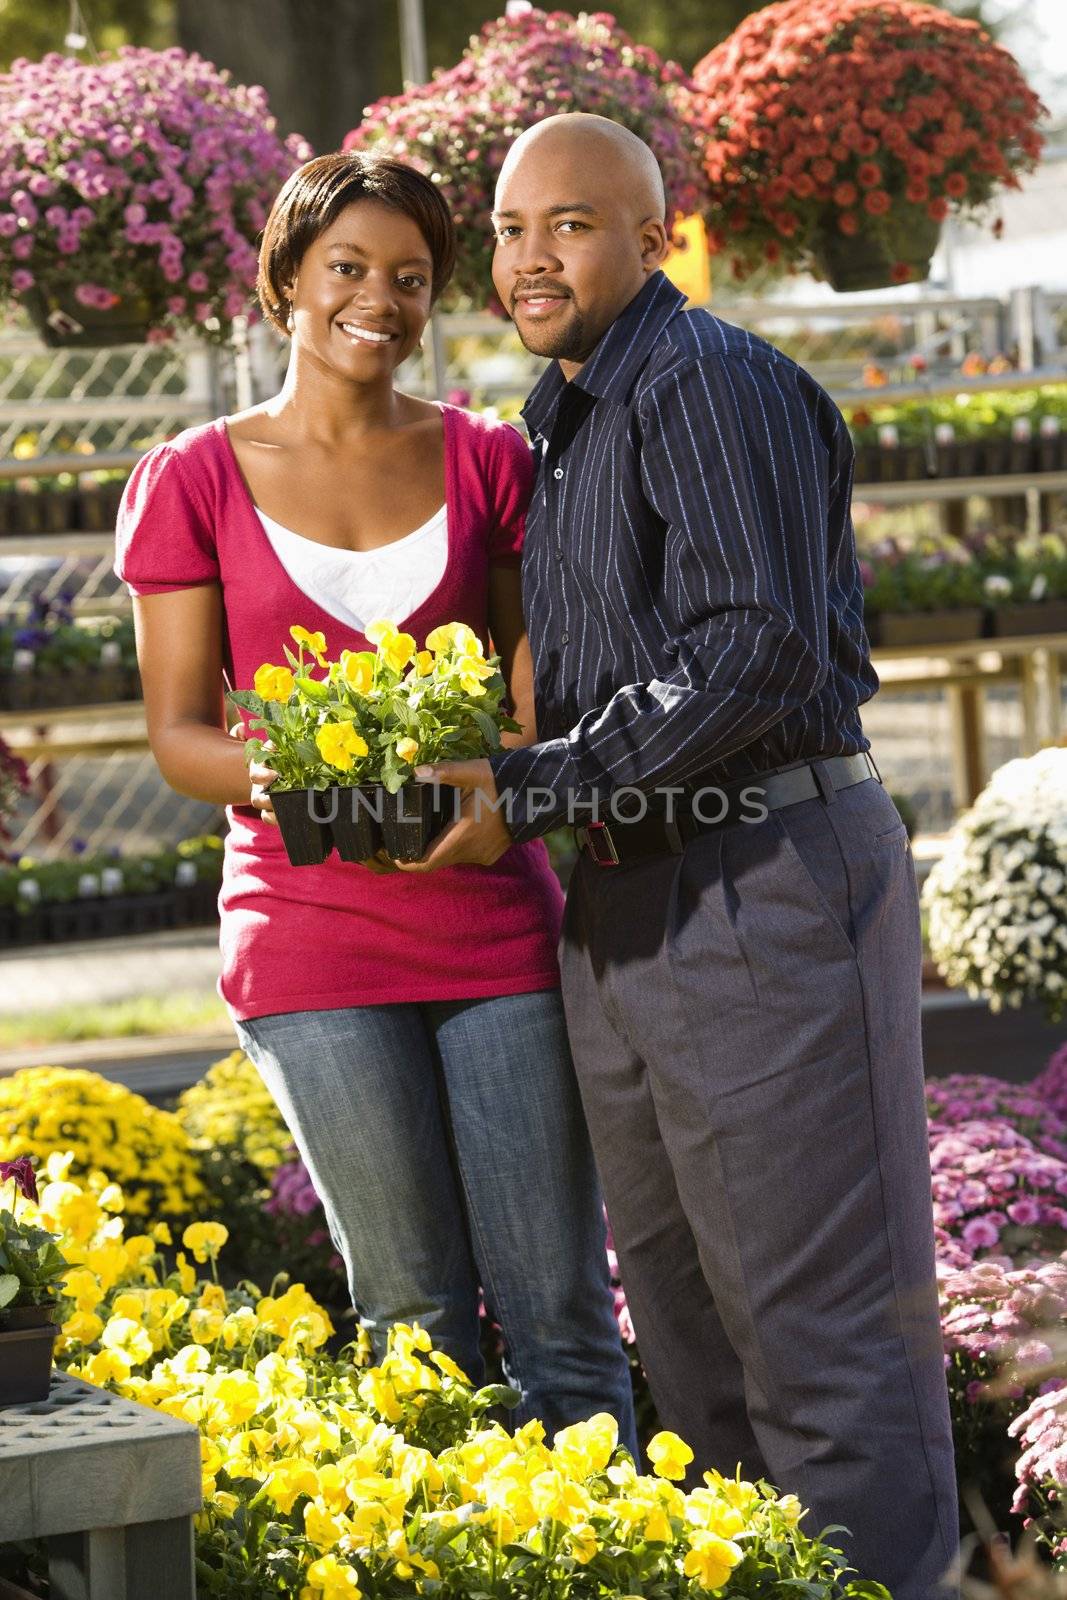 Happy smiling couple picking out flowers at outdoor plant market.